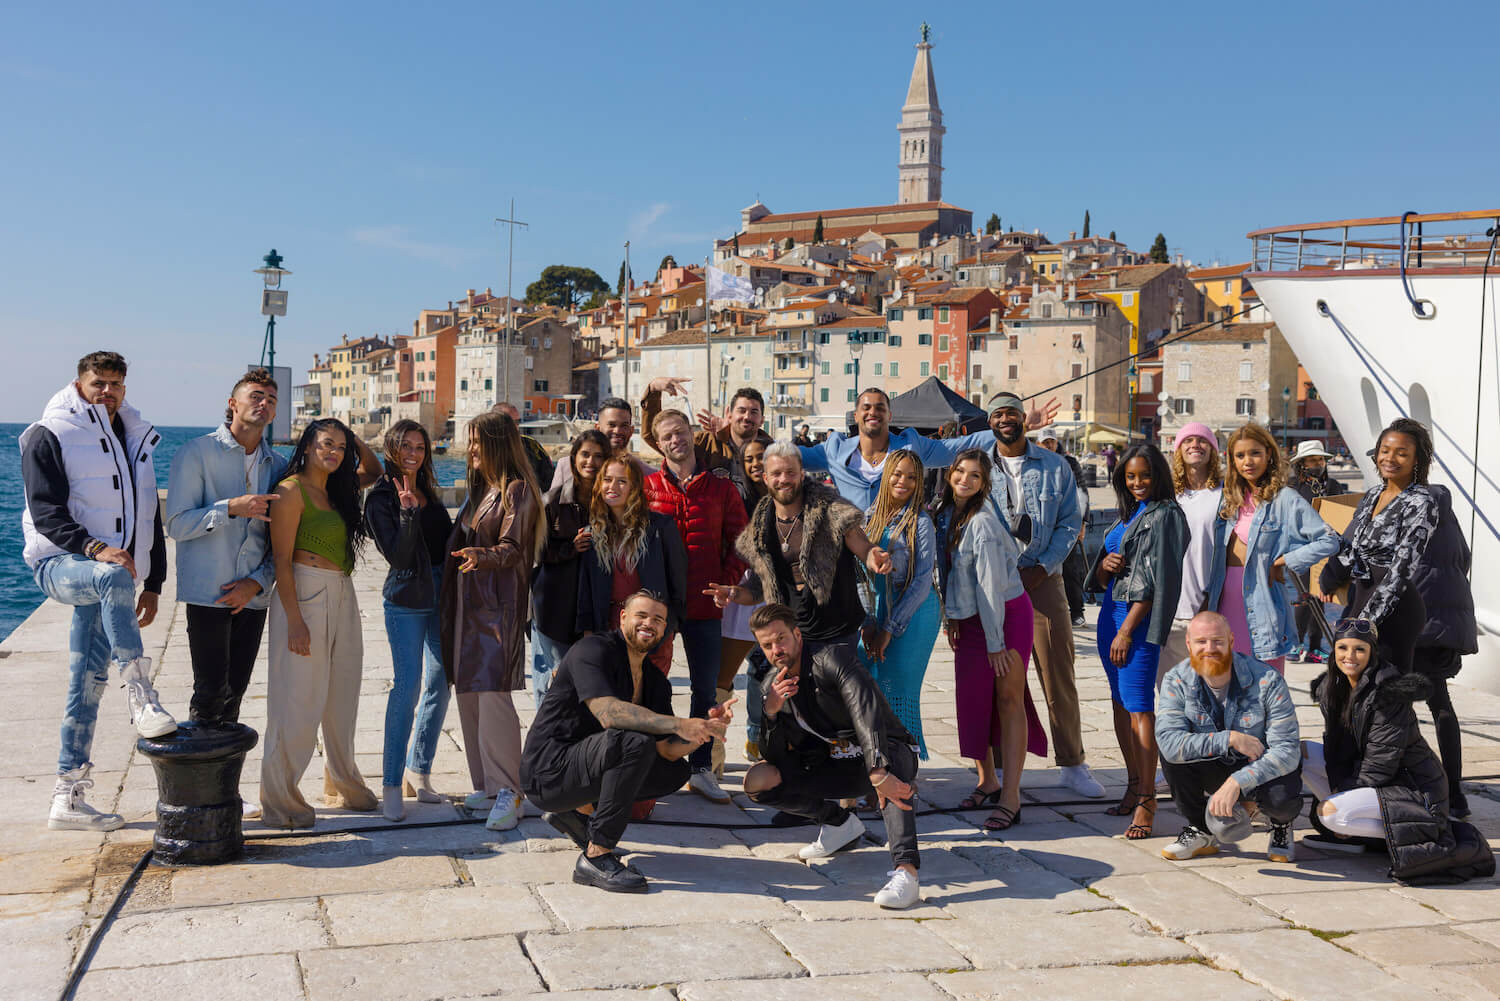 'The Challenge: USA' Season 2 cast posing in Croatia for the premiere episodes